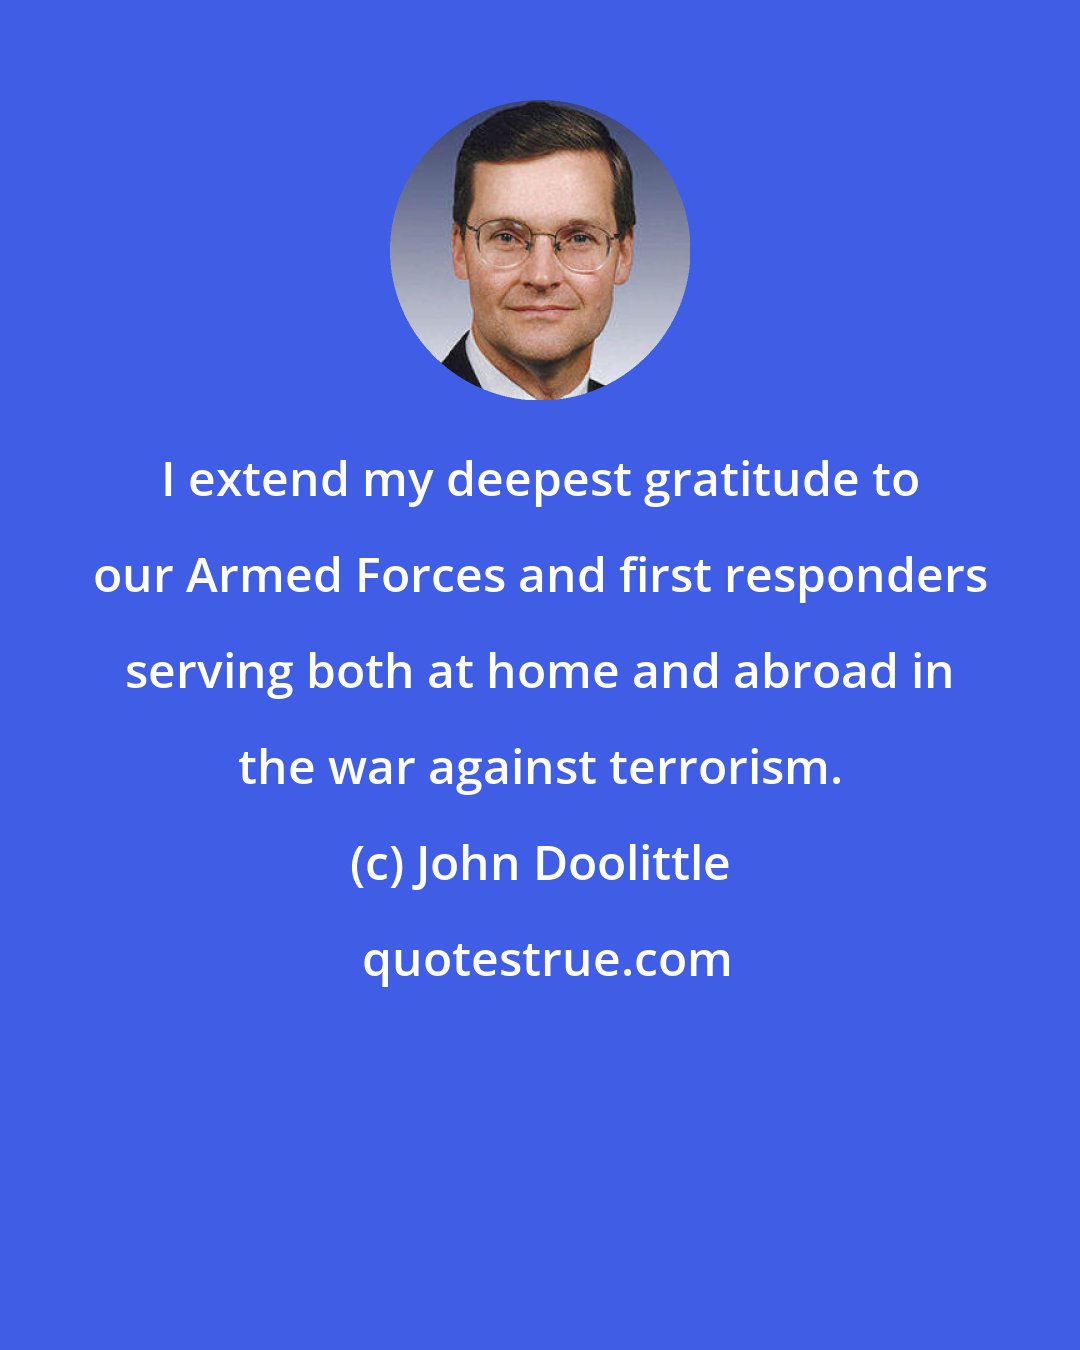 John Doolittle: I extend my deepest gratitude to our Armed Forces and first responders serving both at home and abroad in the war against terrorism.